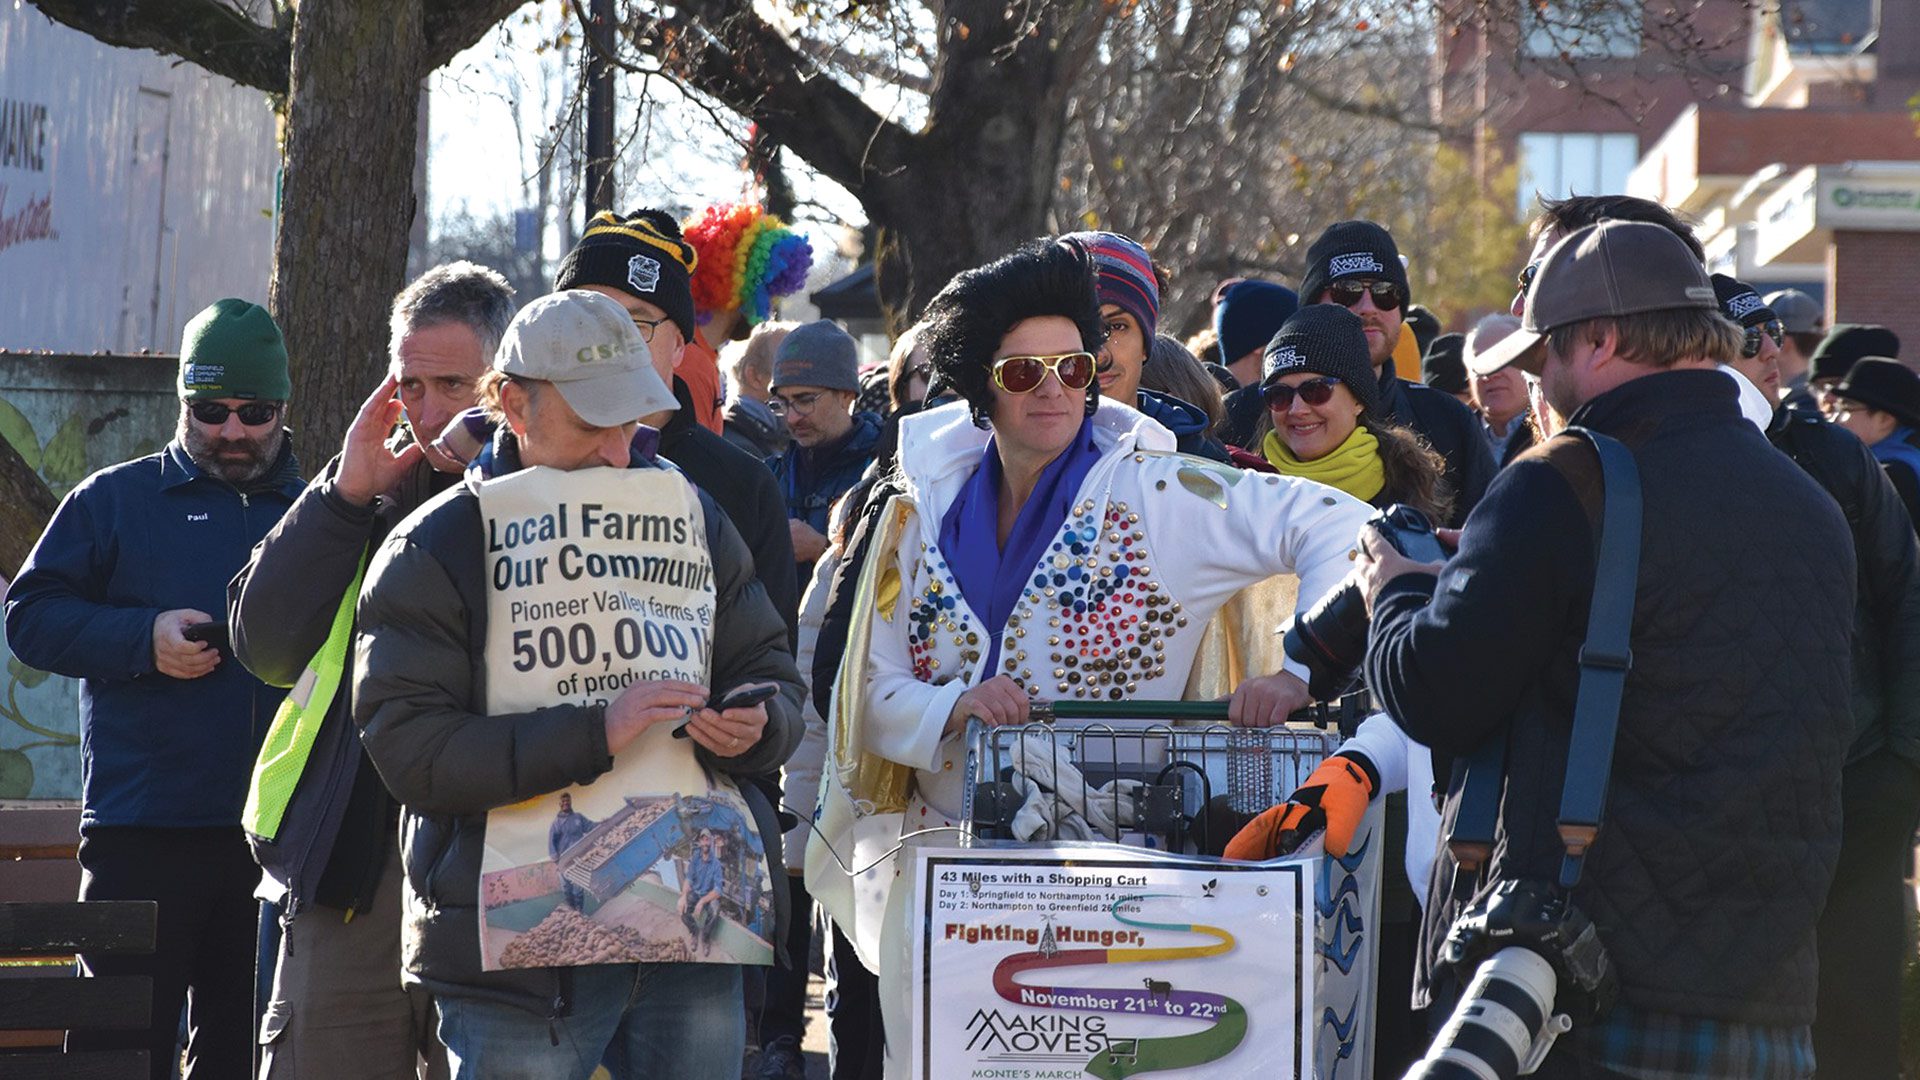 Monte Belmonte, radio personality at WRSI 93.9 the River, led a 43-mile, two-day march on Nov. 21-22 to benefit the mission of the Food Bank of Western Massachusetts to feed neighbors in need